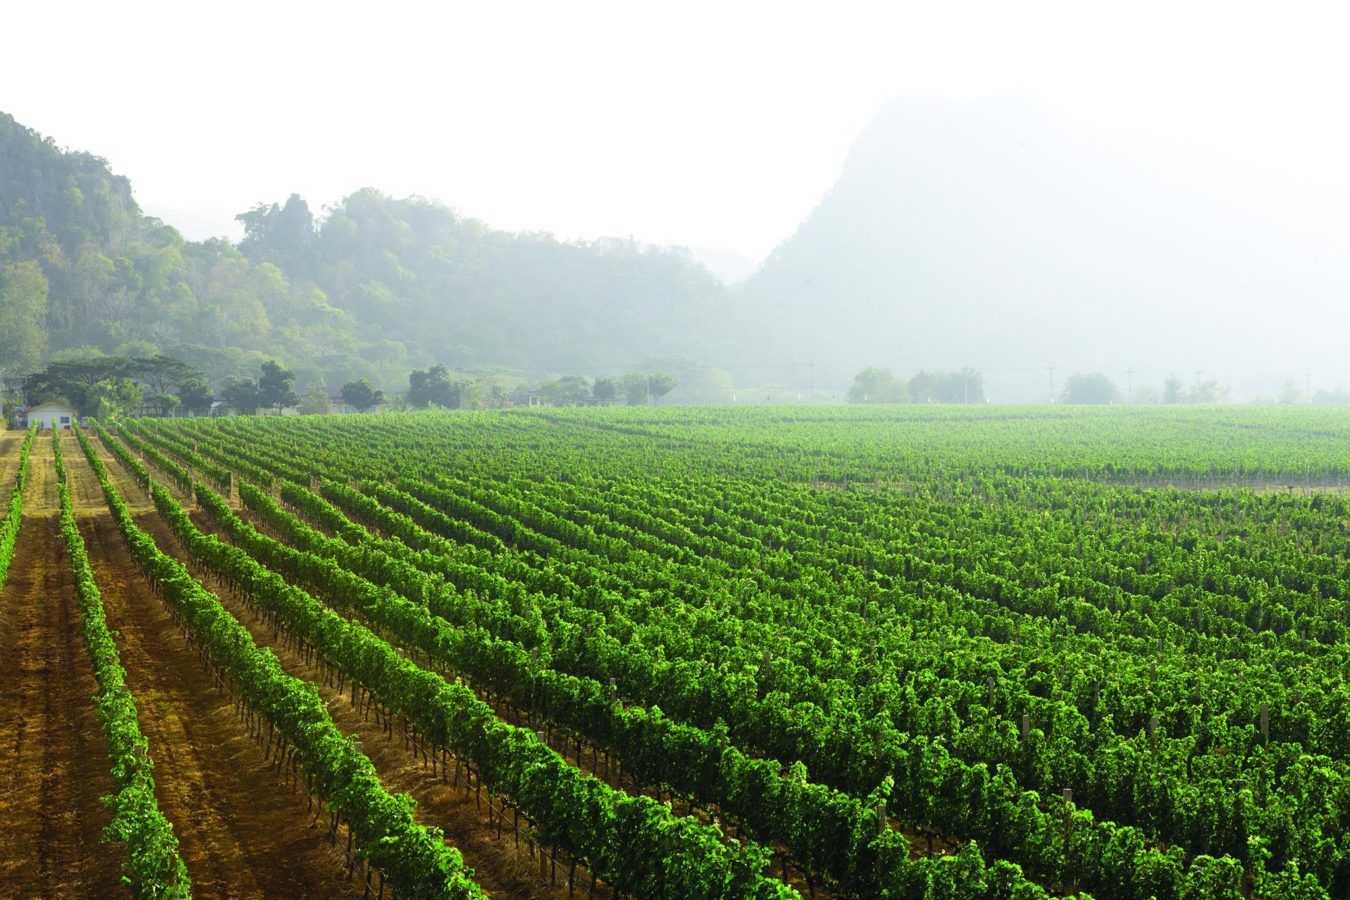 Scenic vineyards and wineries to visit on your next trip to Thailand